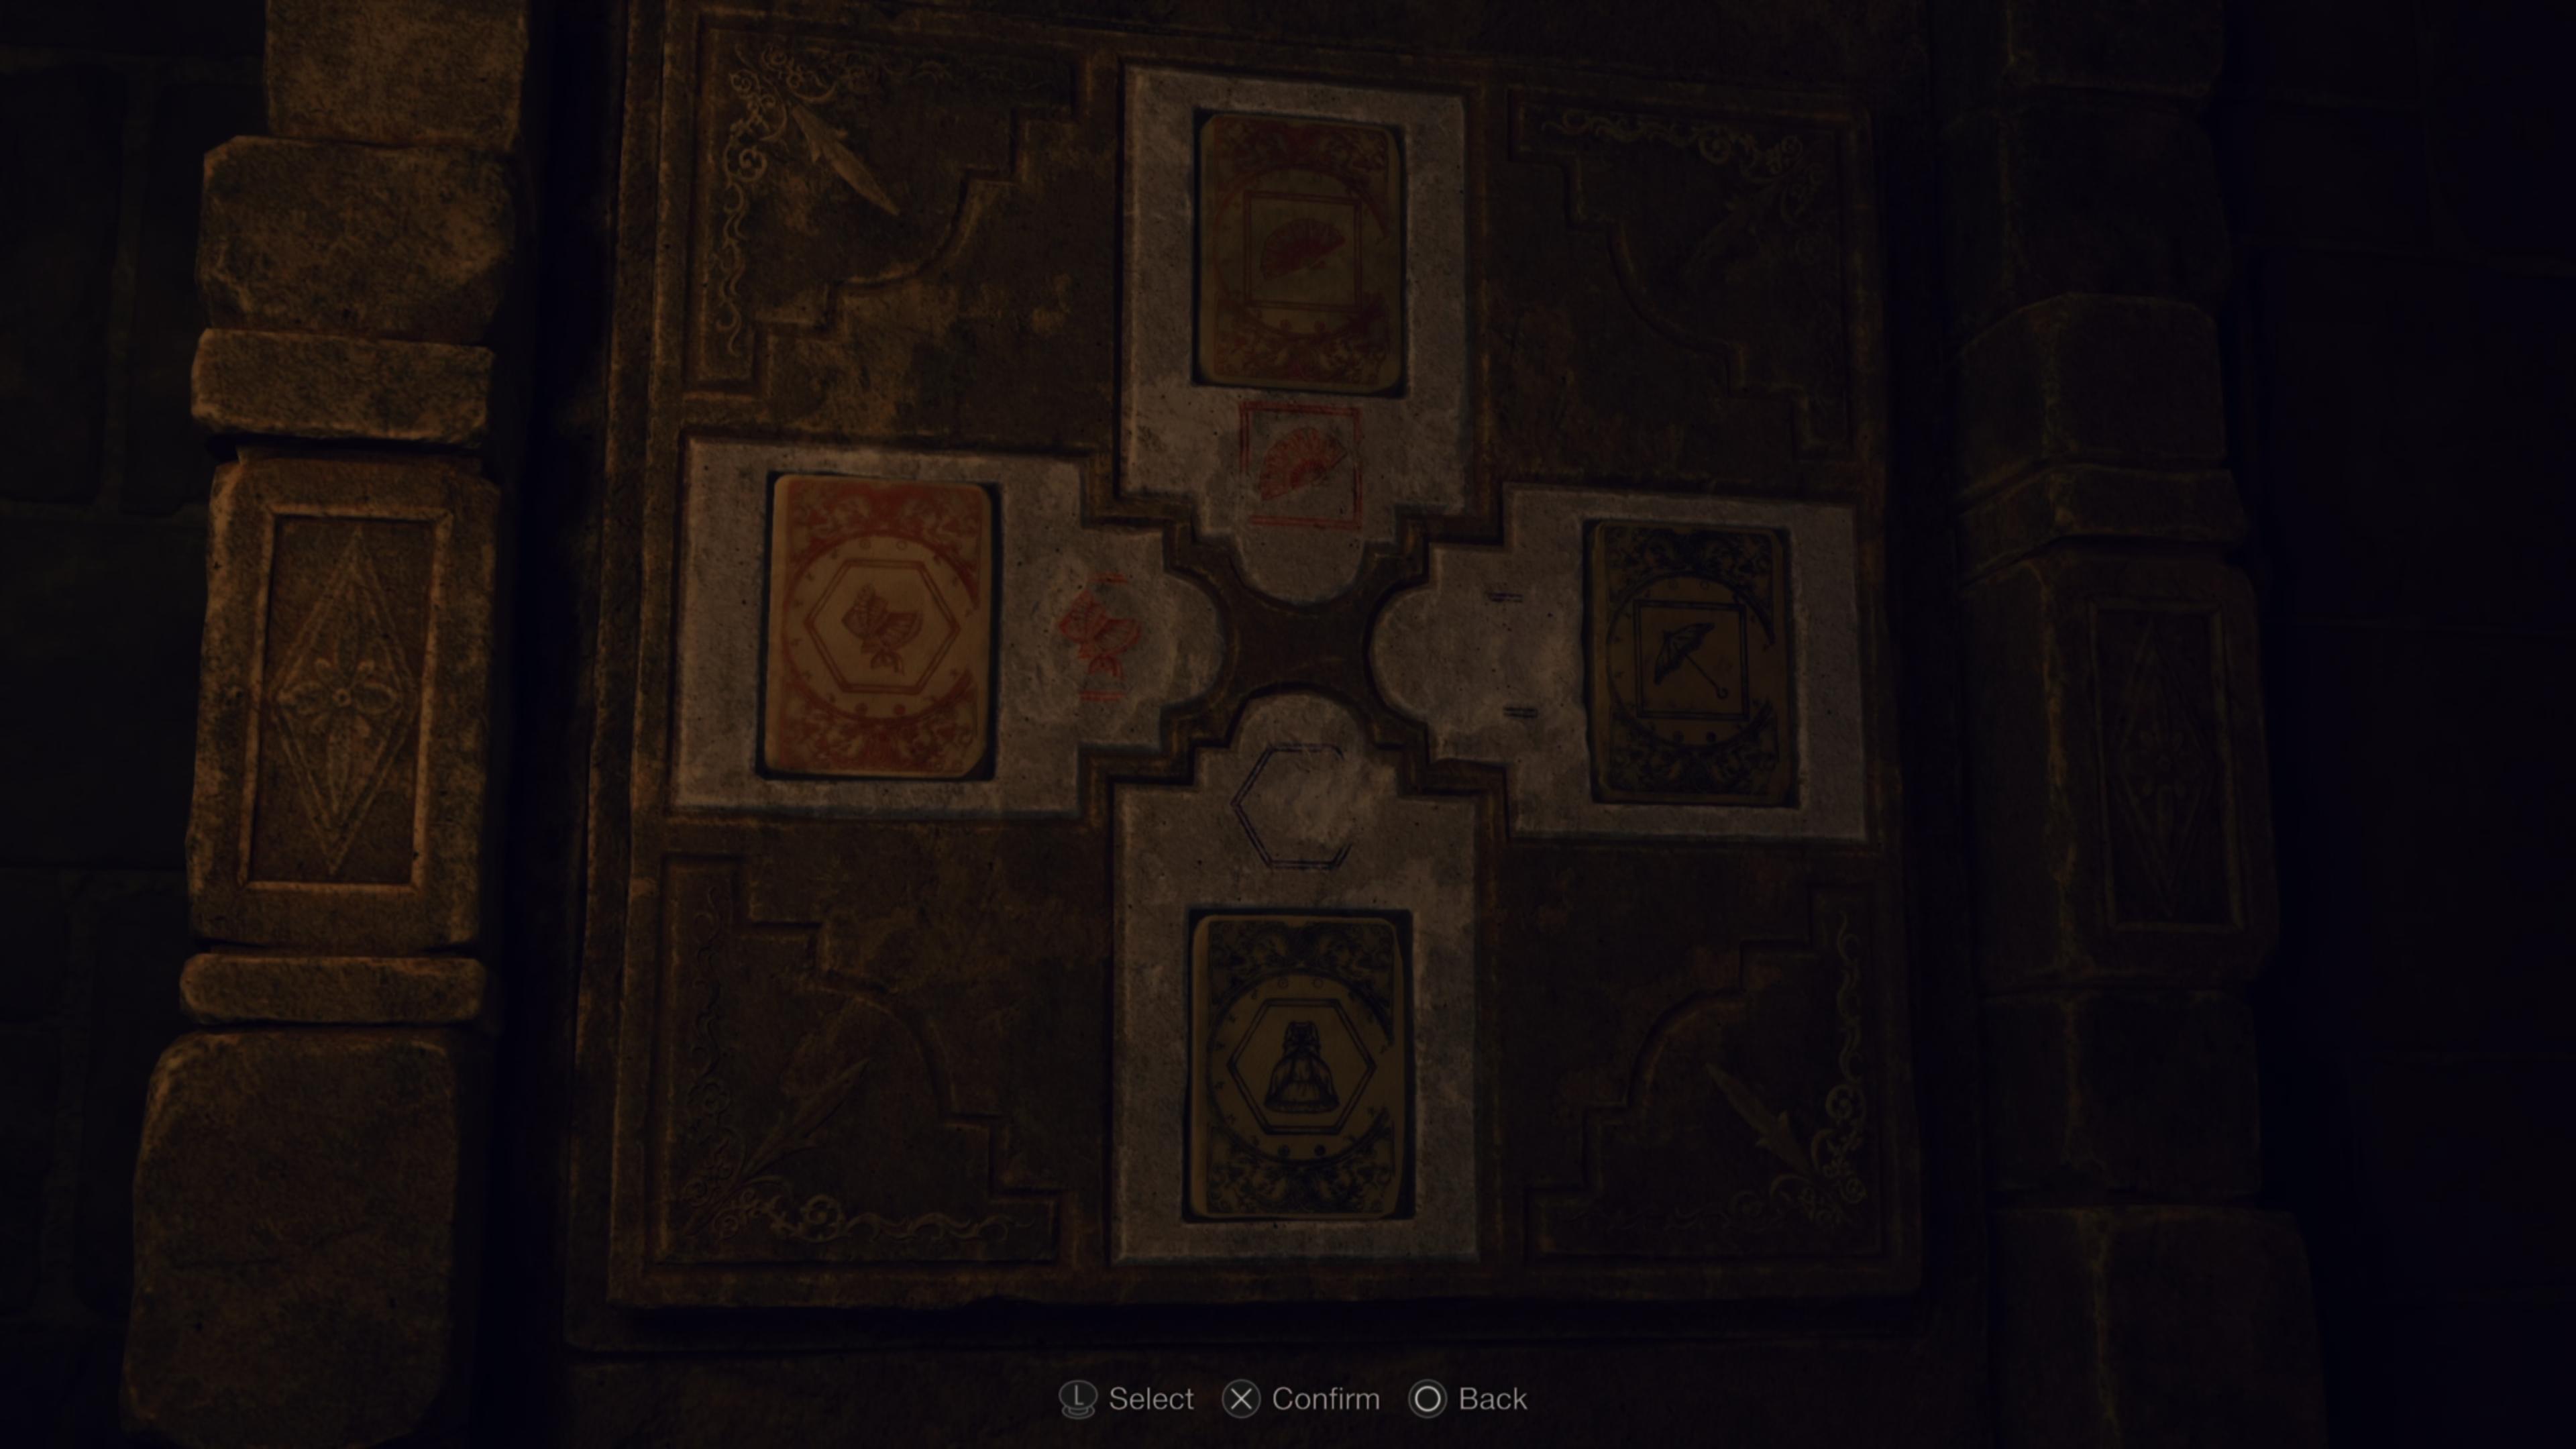 How to solve the Hexagon Puzzle in 'Resident Evil 4 Remake